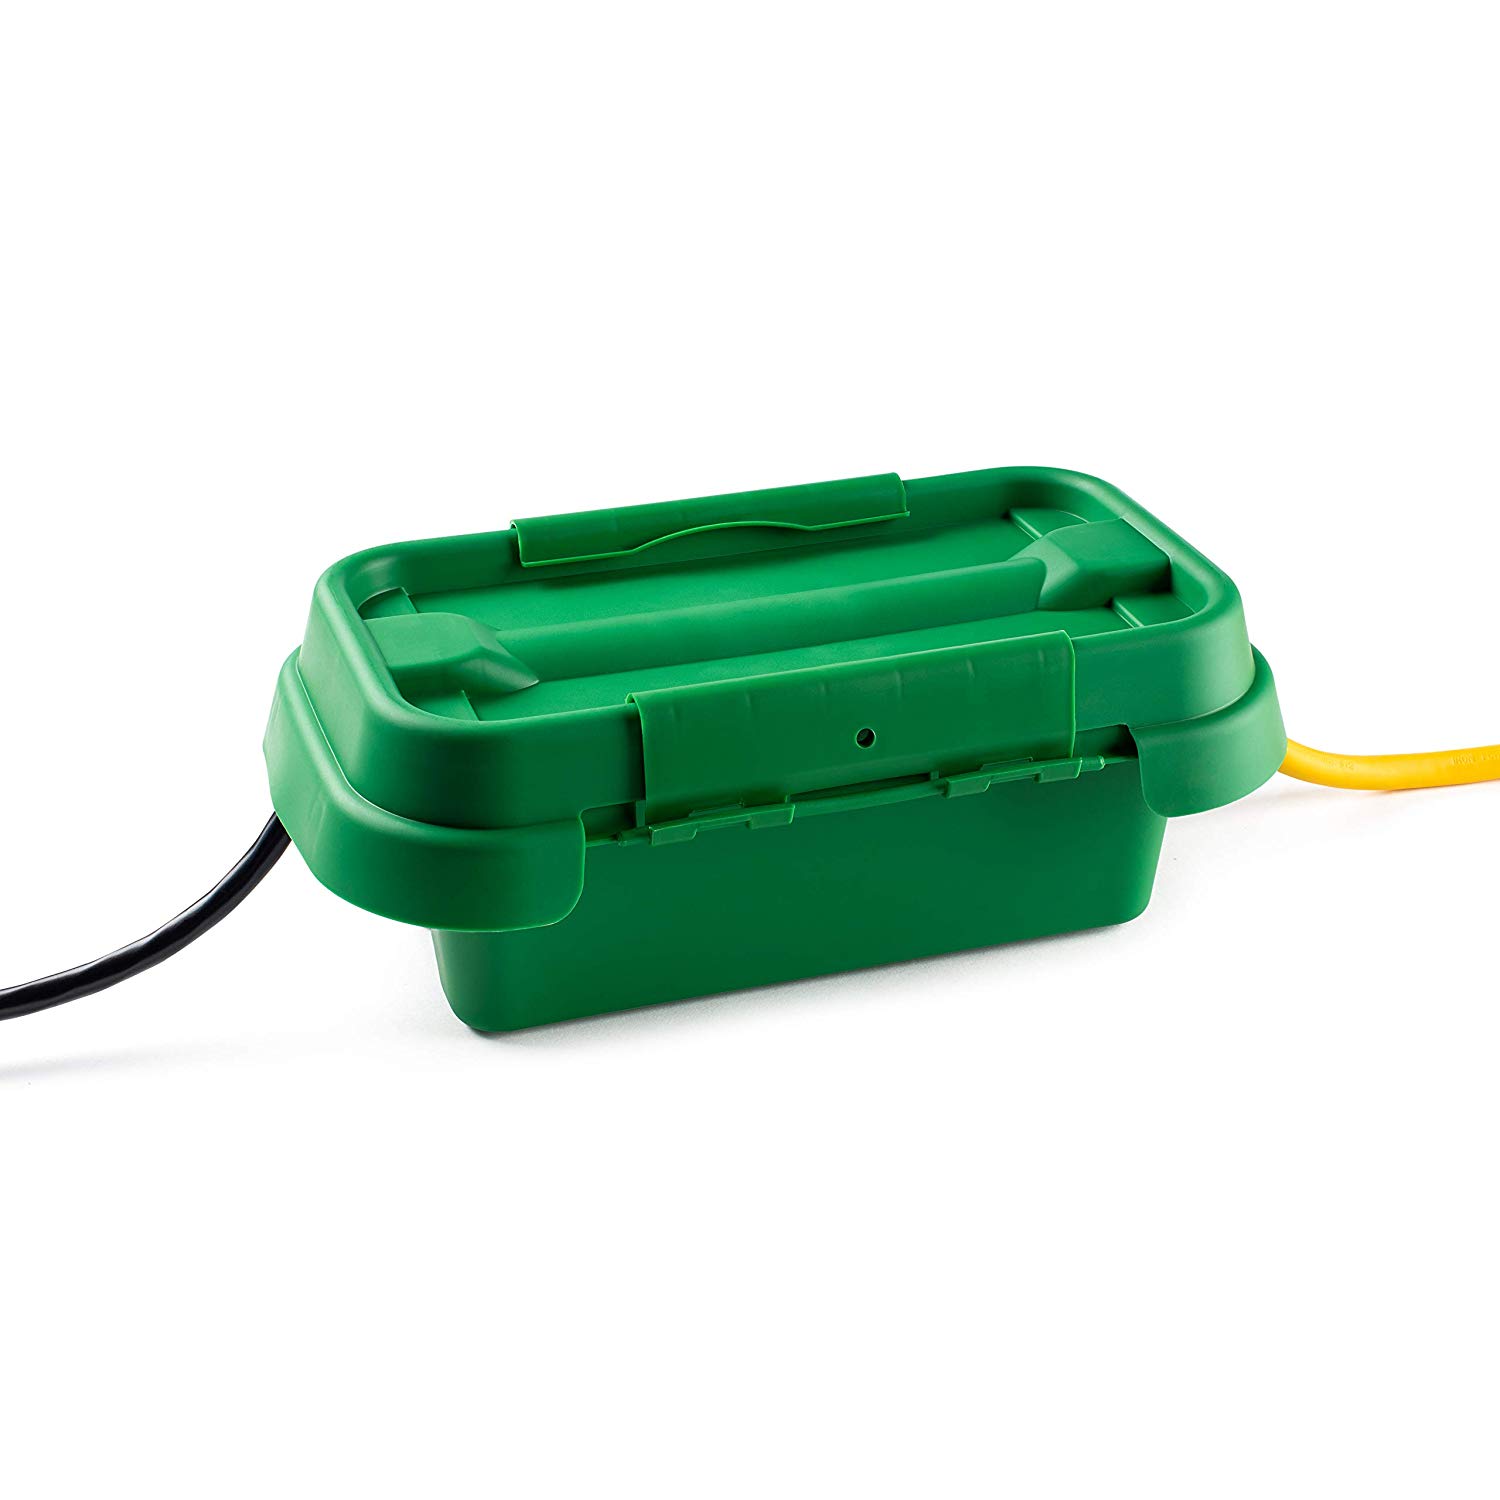 Sockit Box The Original Weatherproof Connection Box Indoor & Outdoor Electrical Cord Enclosure for Timers, Extension Cables, Holiday Lights, Tools, Fountains & More Size Small Green - image 1 of 6